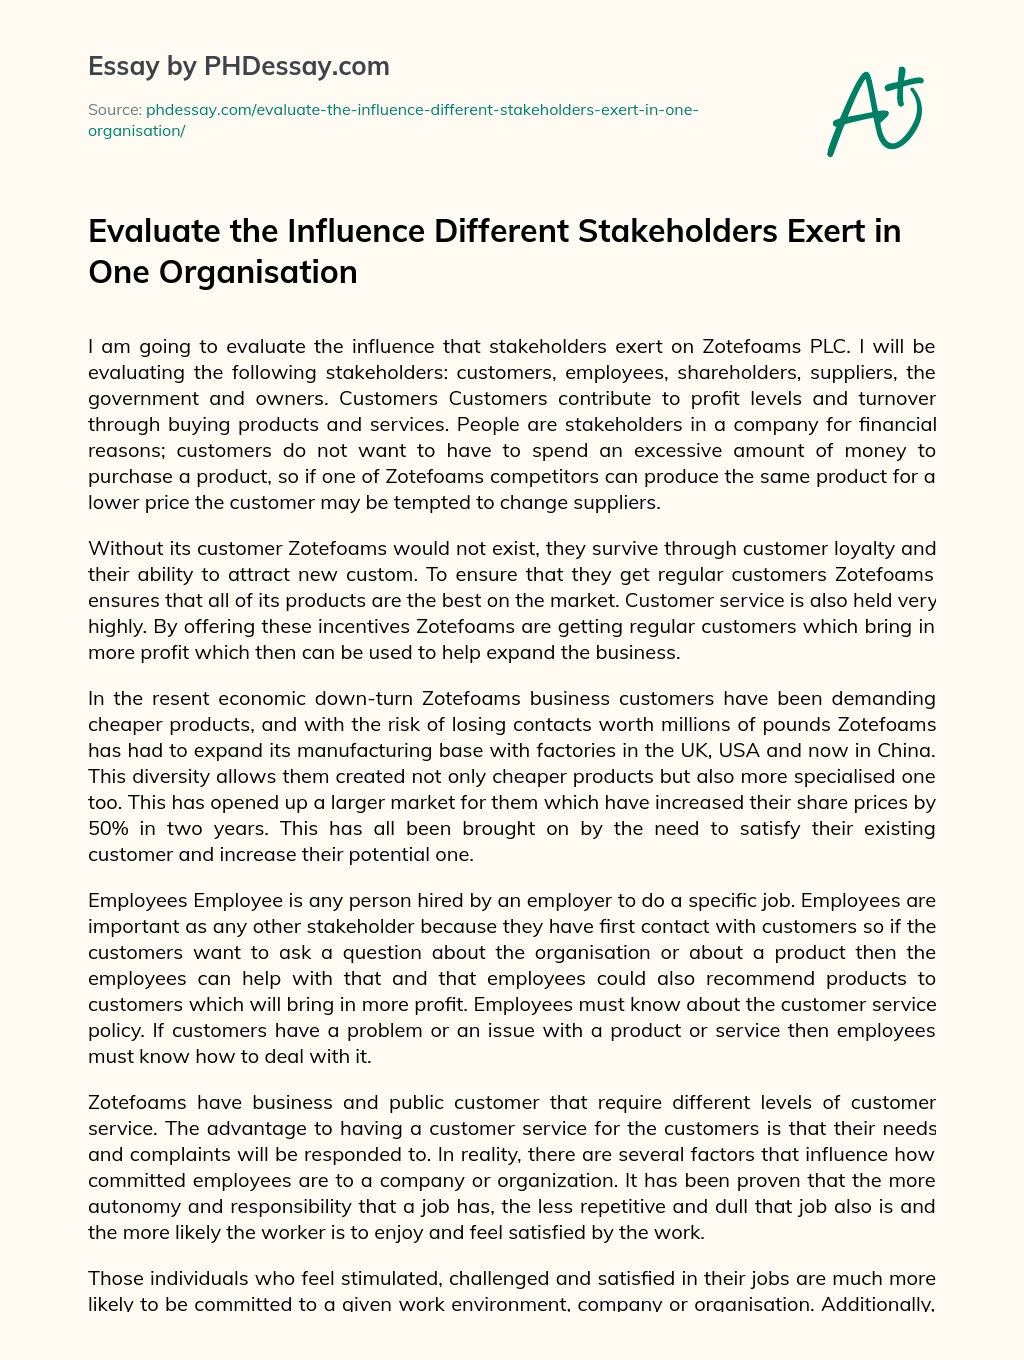 Evaluate the Influence Different Stakeholders Exert in One Organisation essay